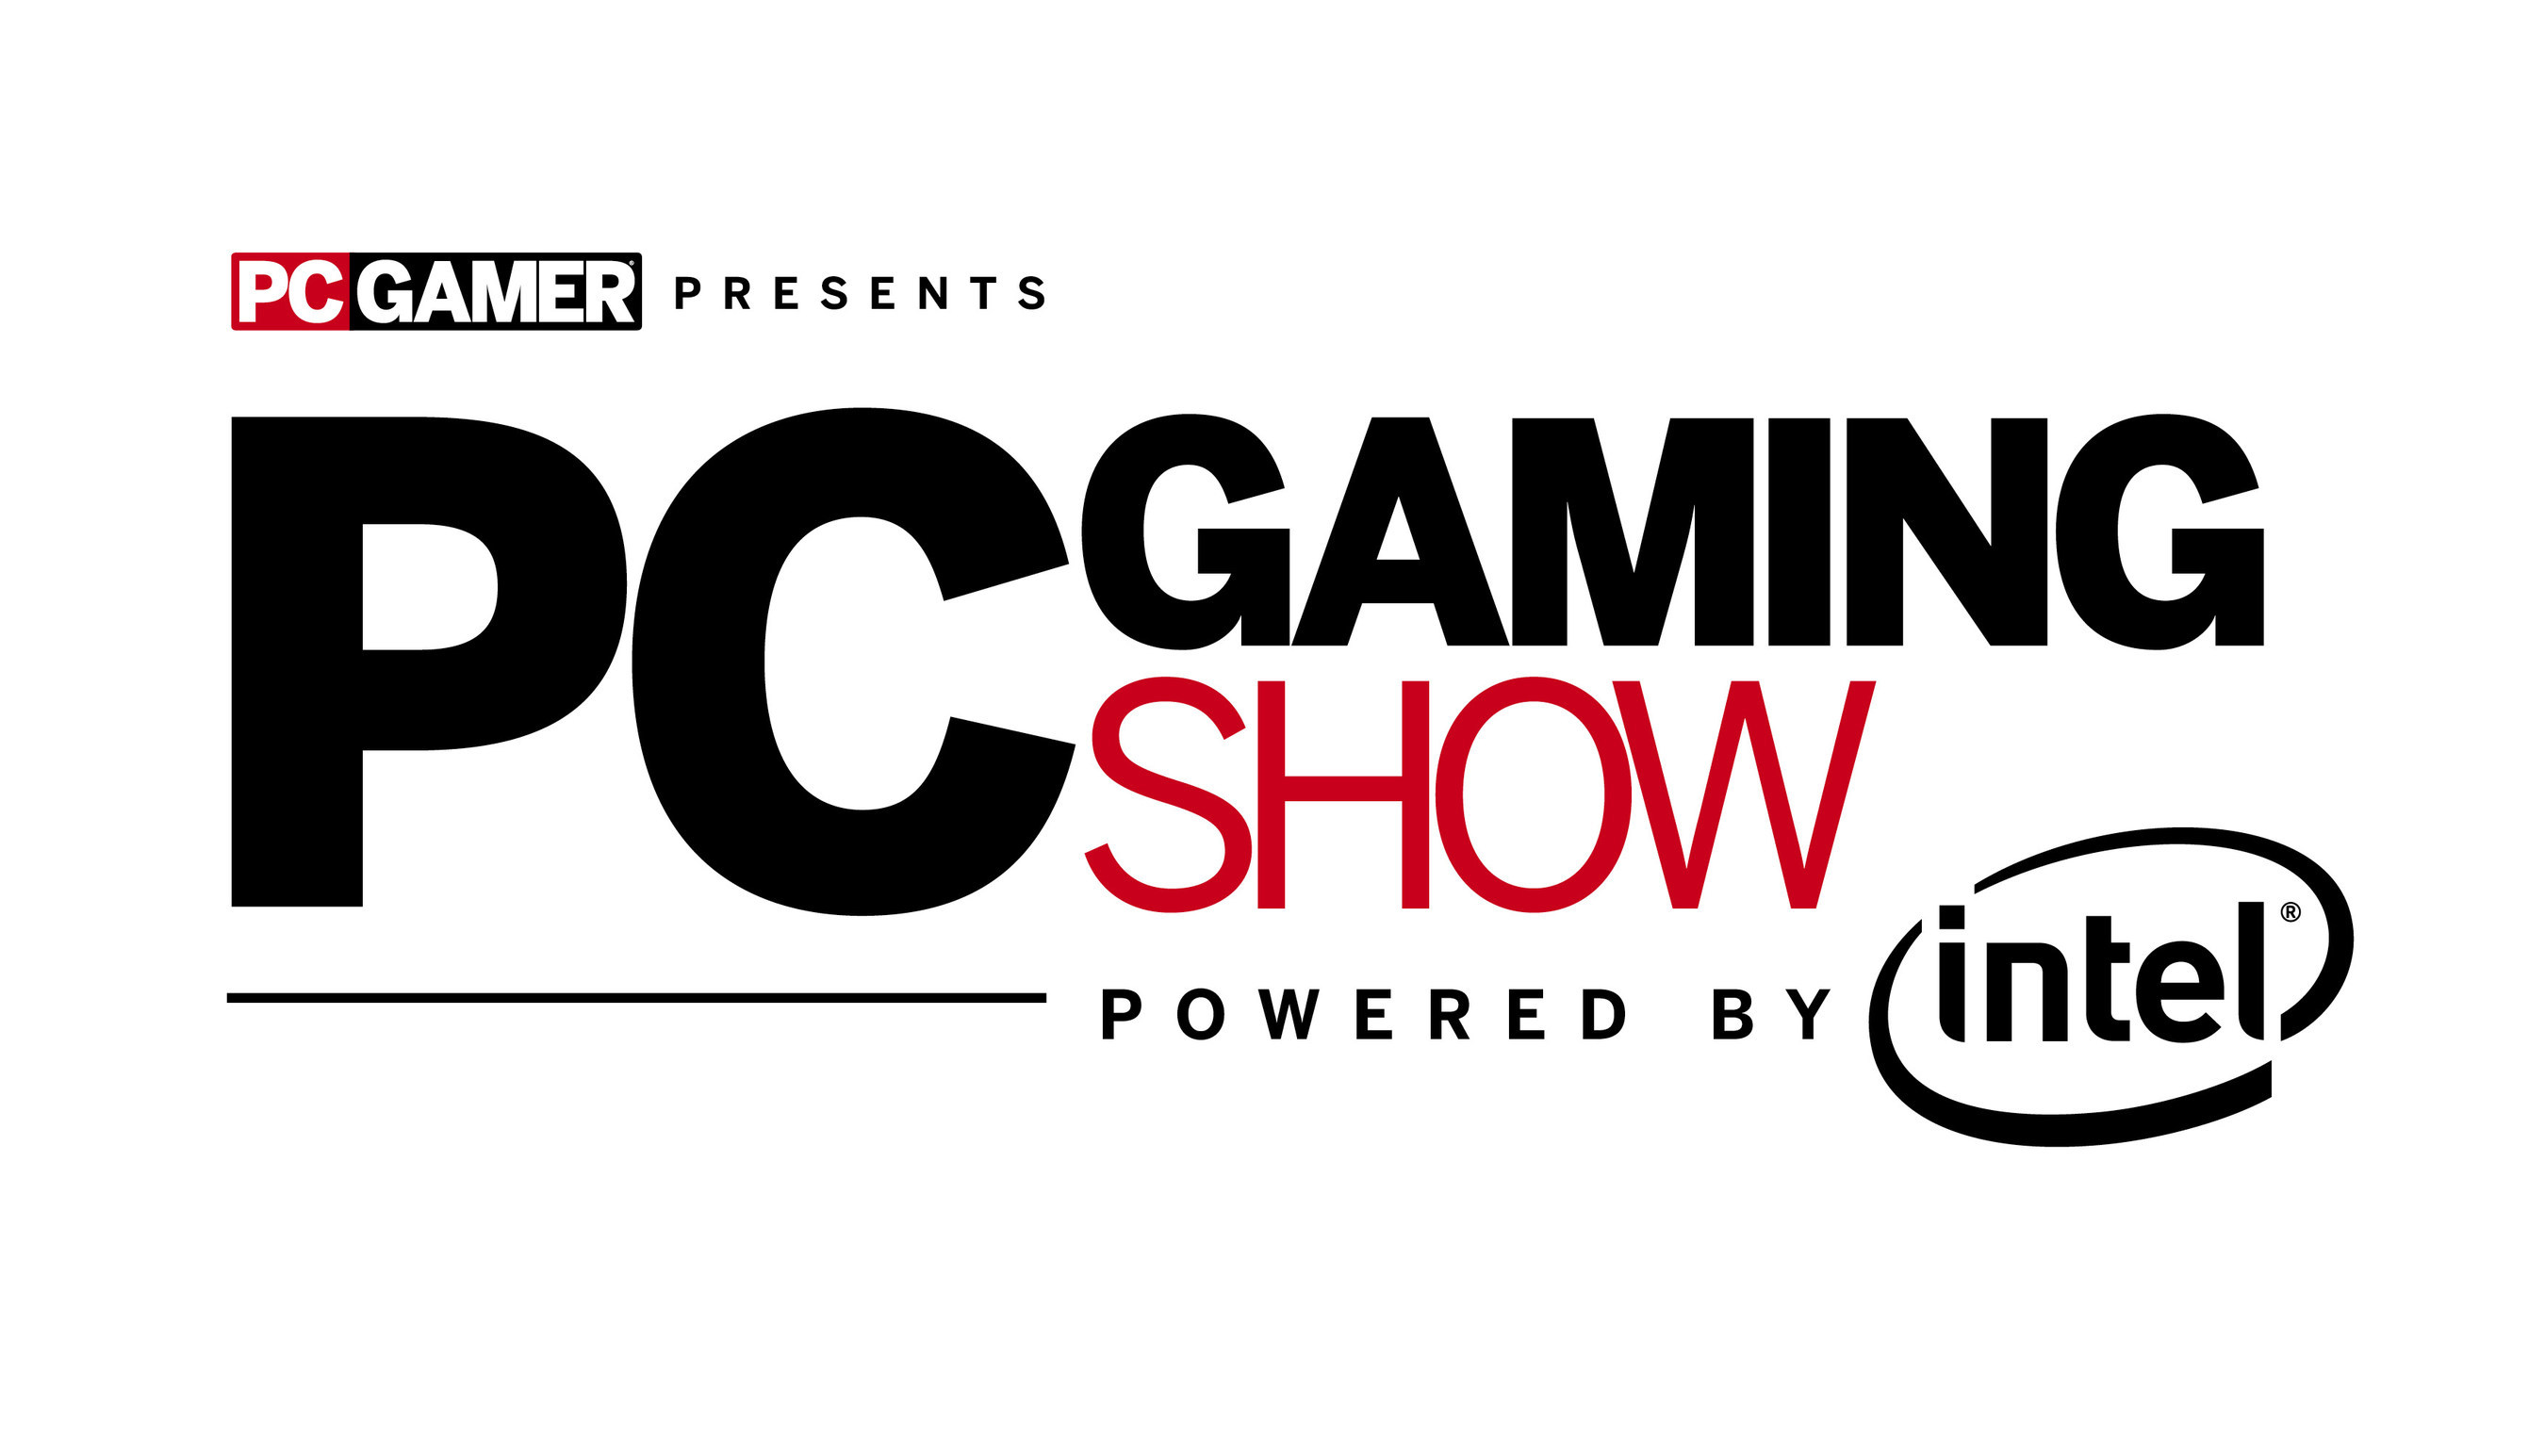 PC Gaming Show 2017